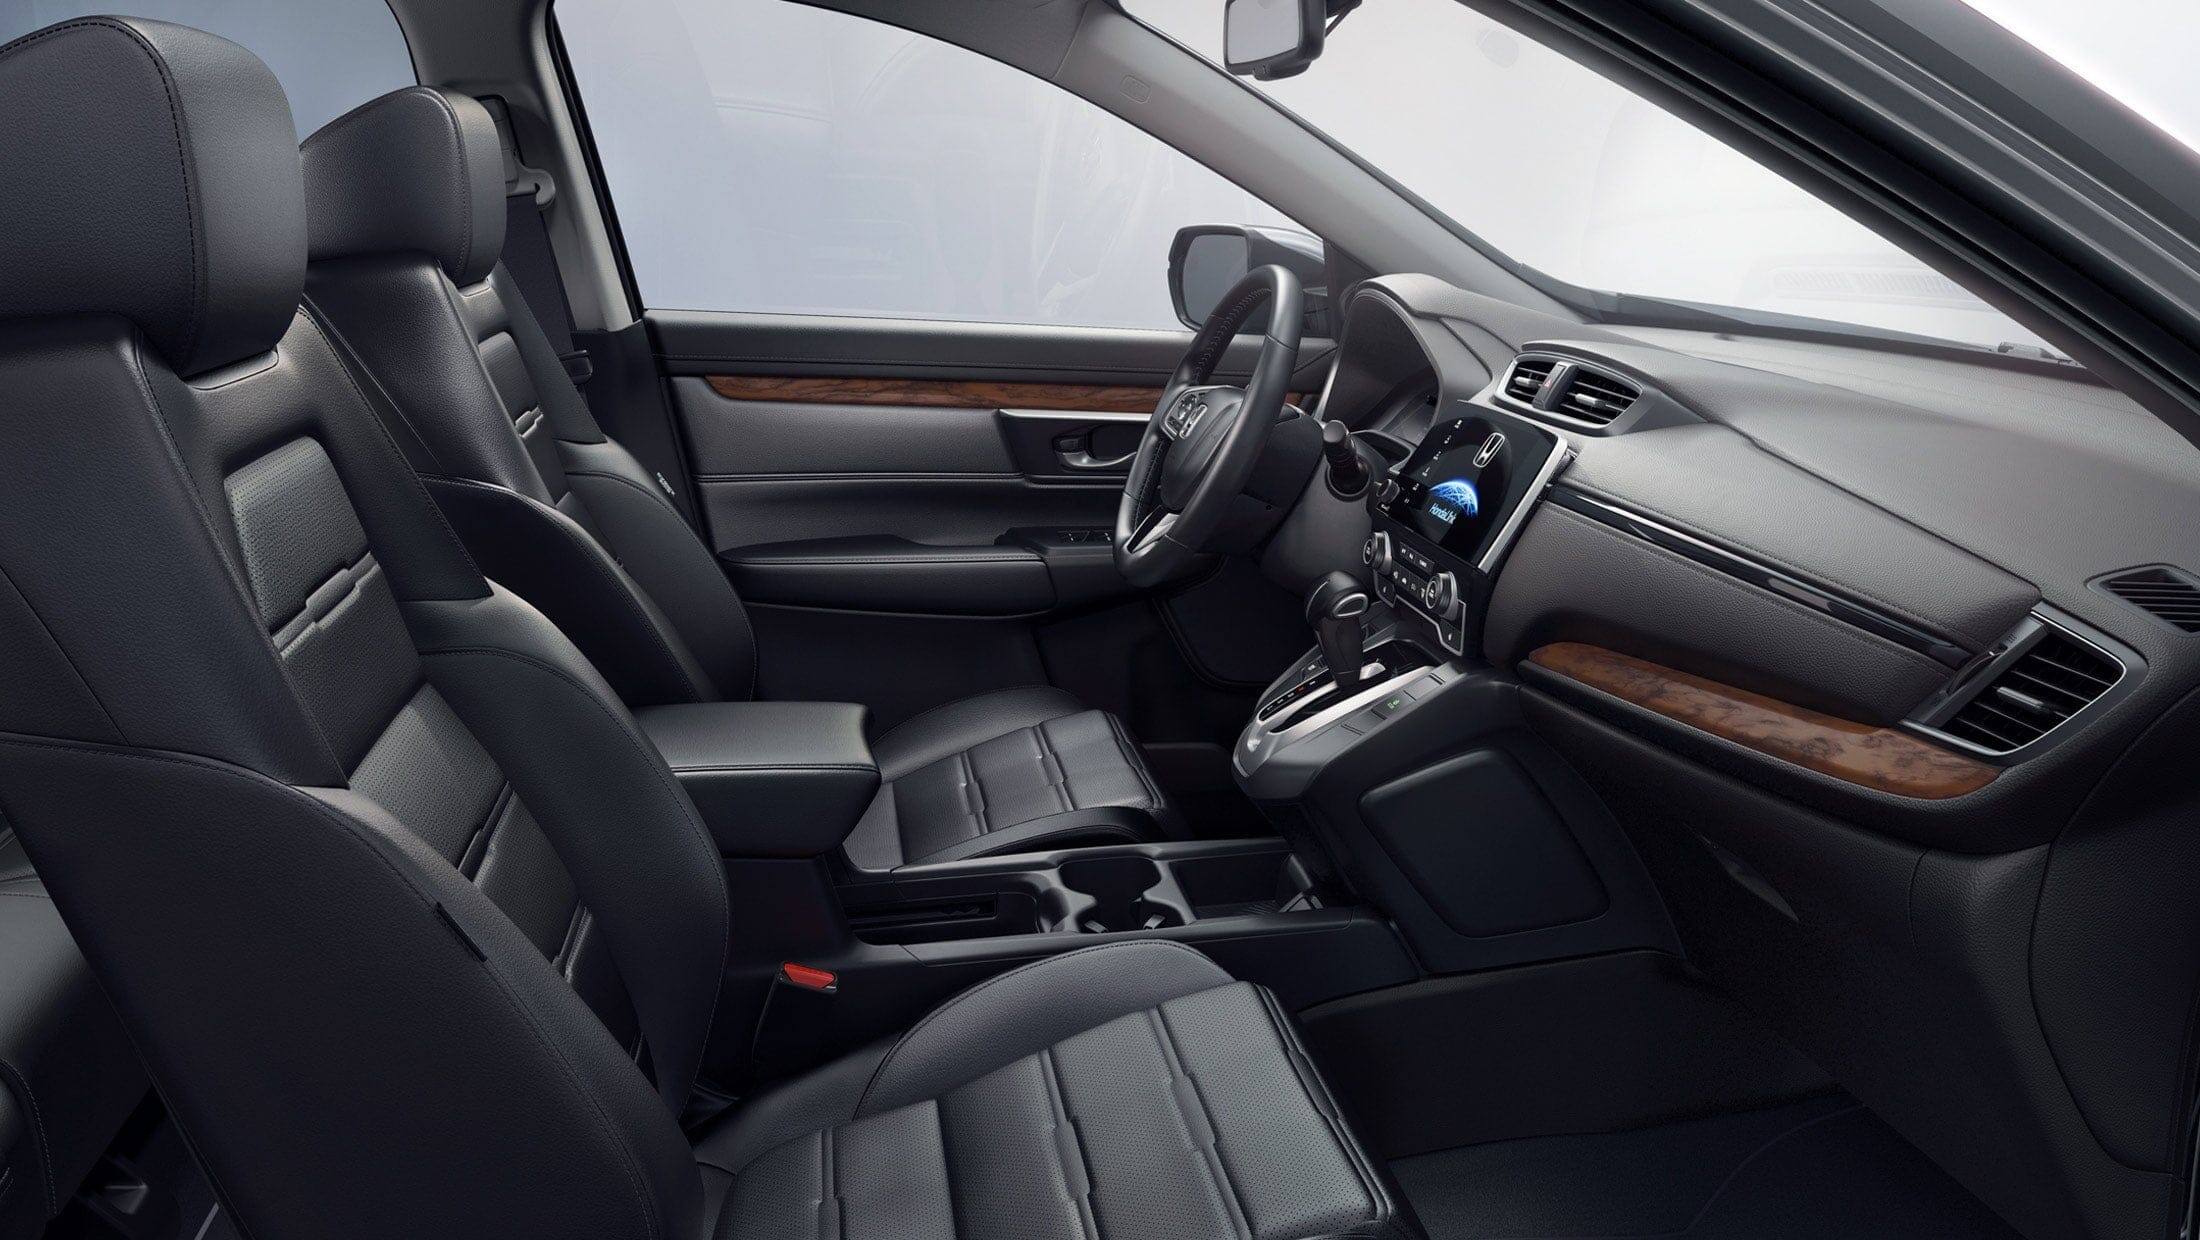 Full interior shot of the 2019 Honda CR-V with leather-trimmed interior.